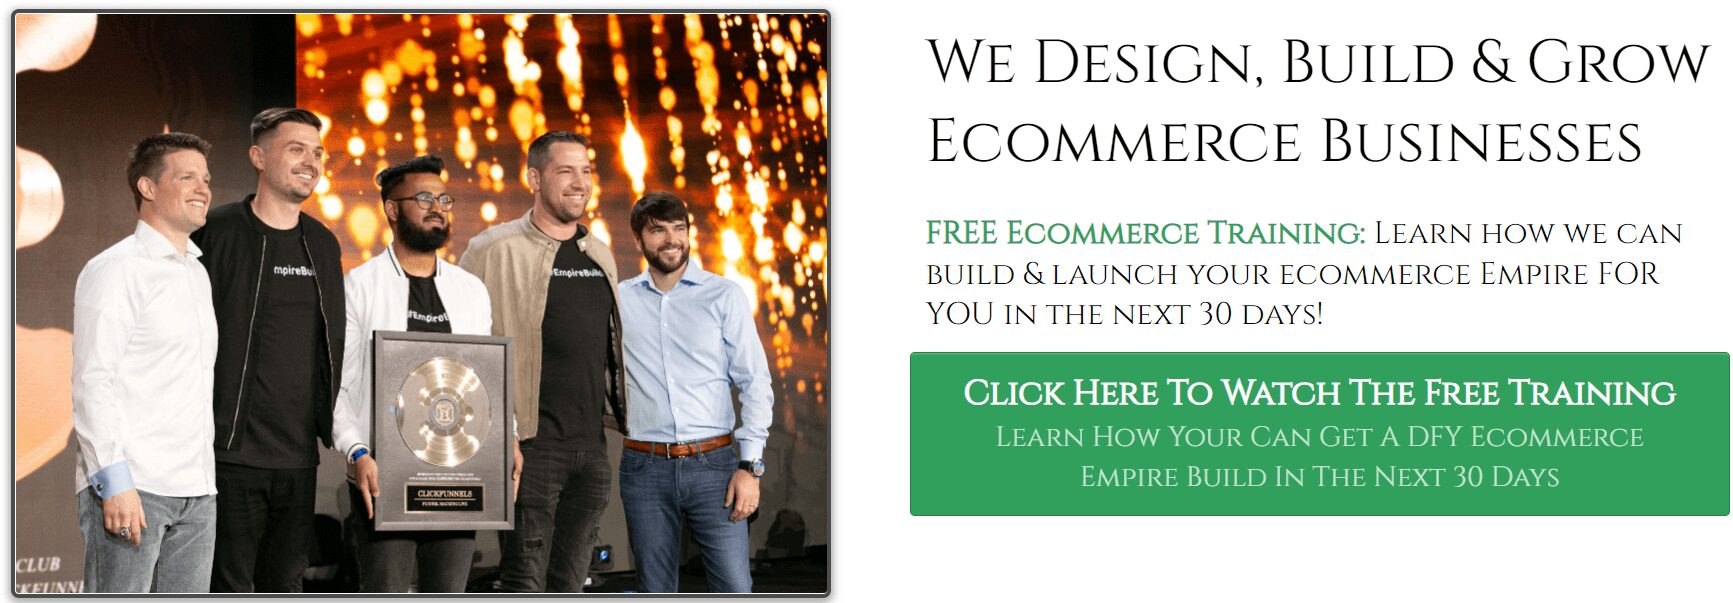 ecommerce empire builders design and build and grow ecommerce buisnesses